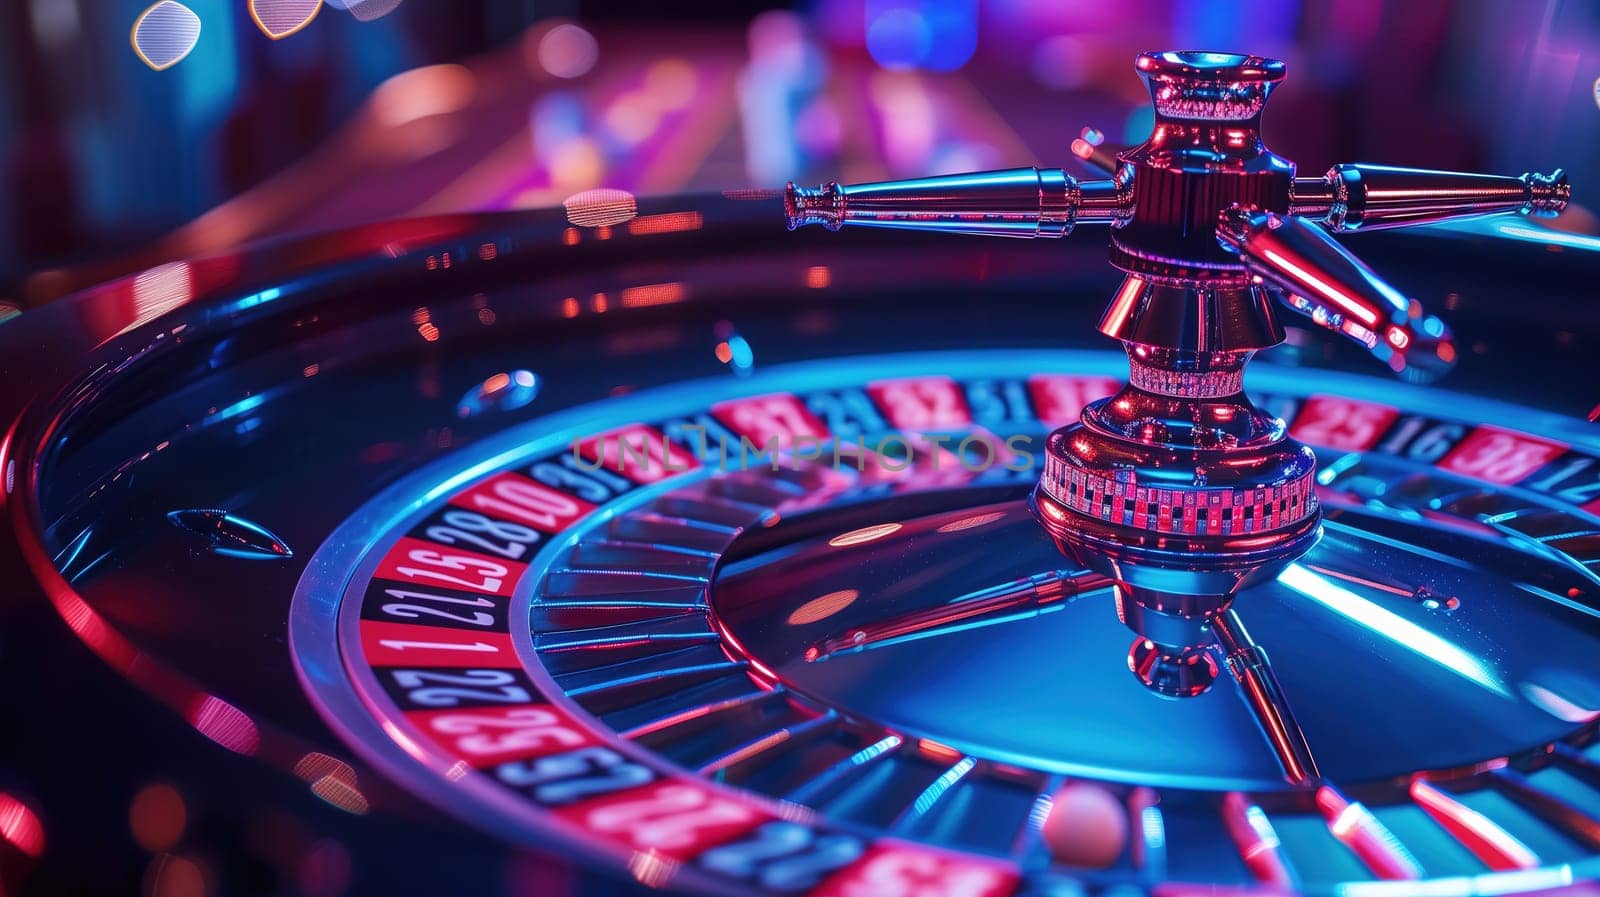 A close-up view of a brightly illuminated roulette wheel, capturing the essence of a gambling environment at a casino. The vibrant lights reflect off the polished surfaces and create an atmosphere of excitement and chance as the wheel awaits the next spin.